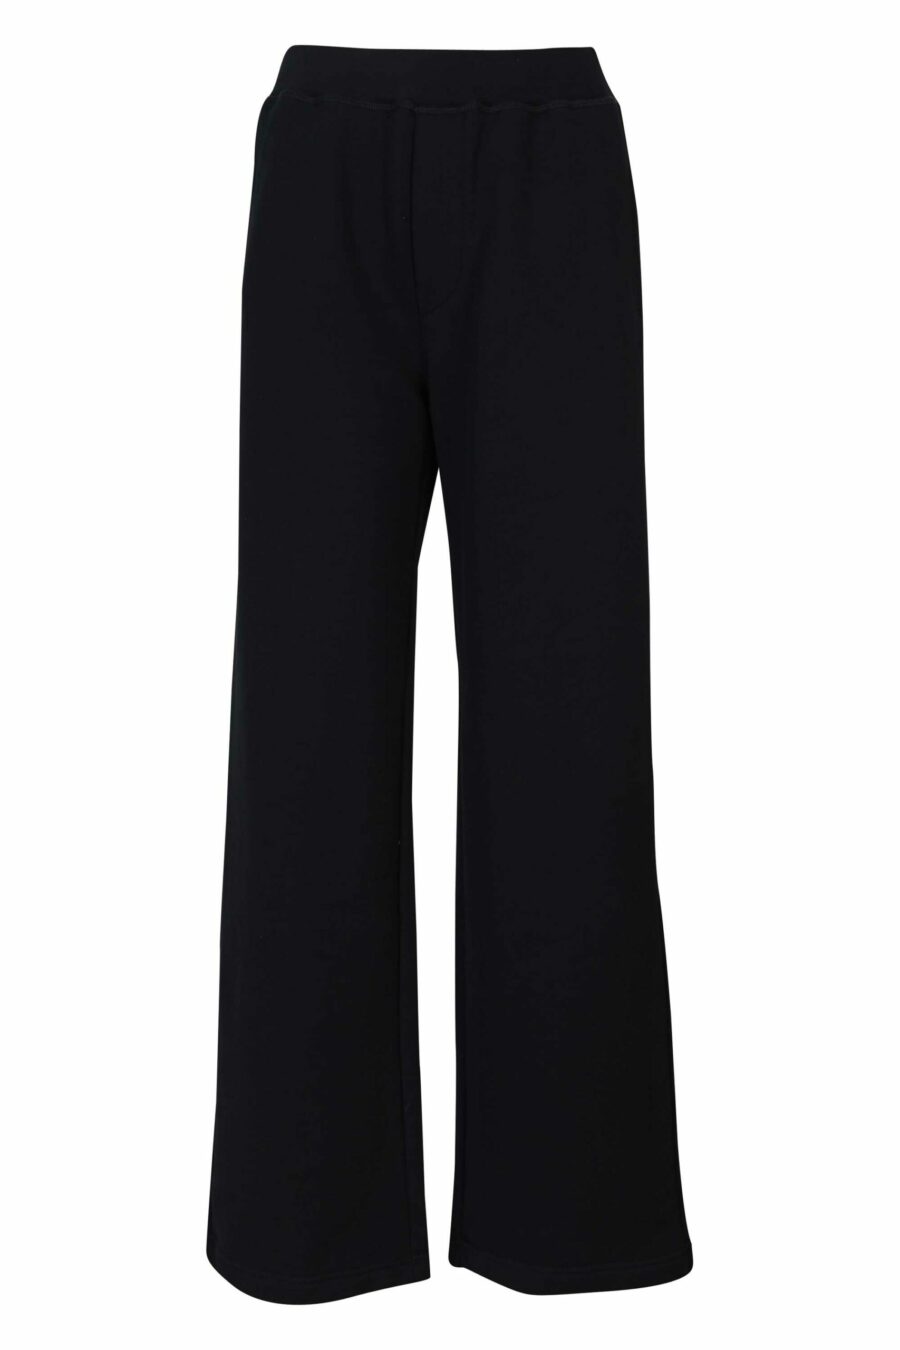 Wide black trousers with logo - 8054148457945 1 scaled